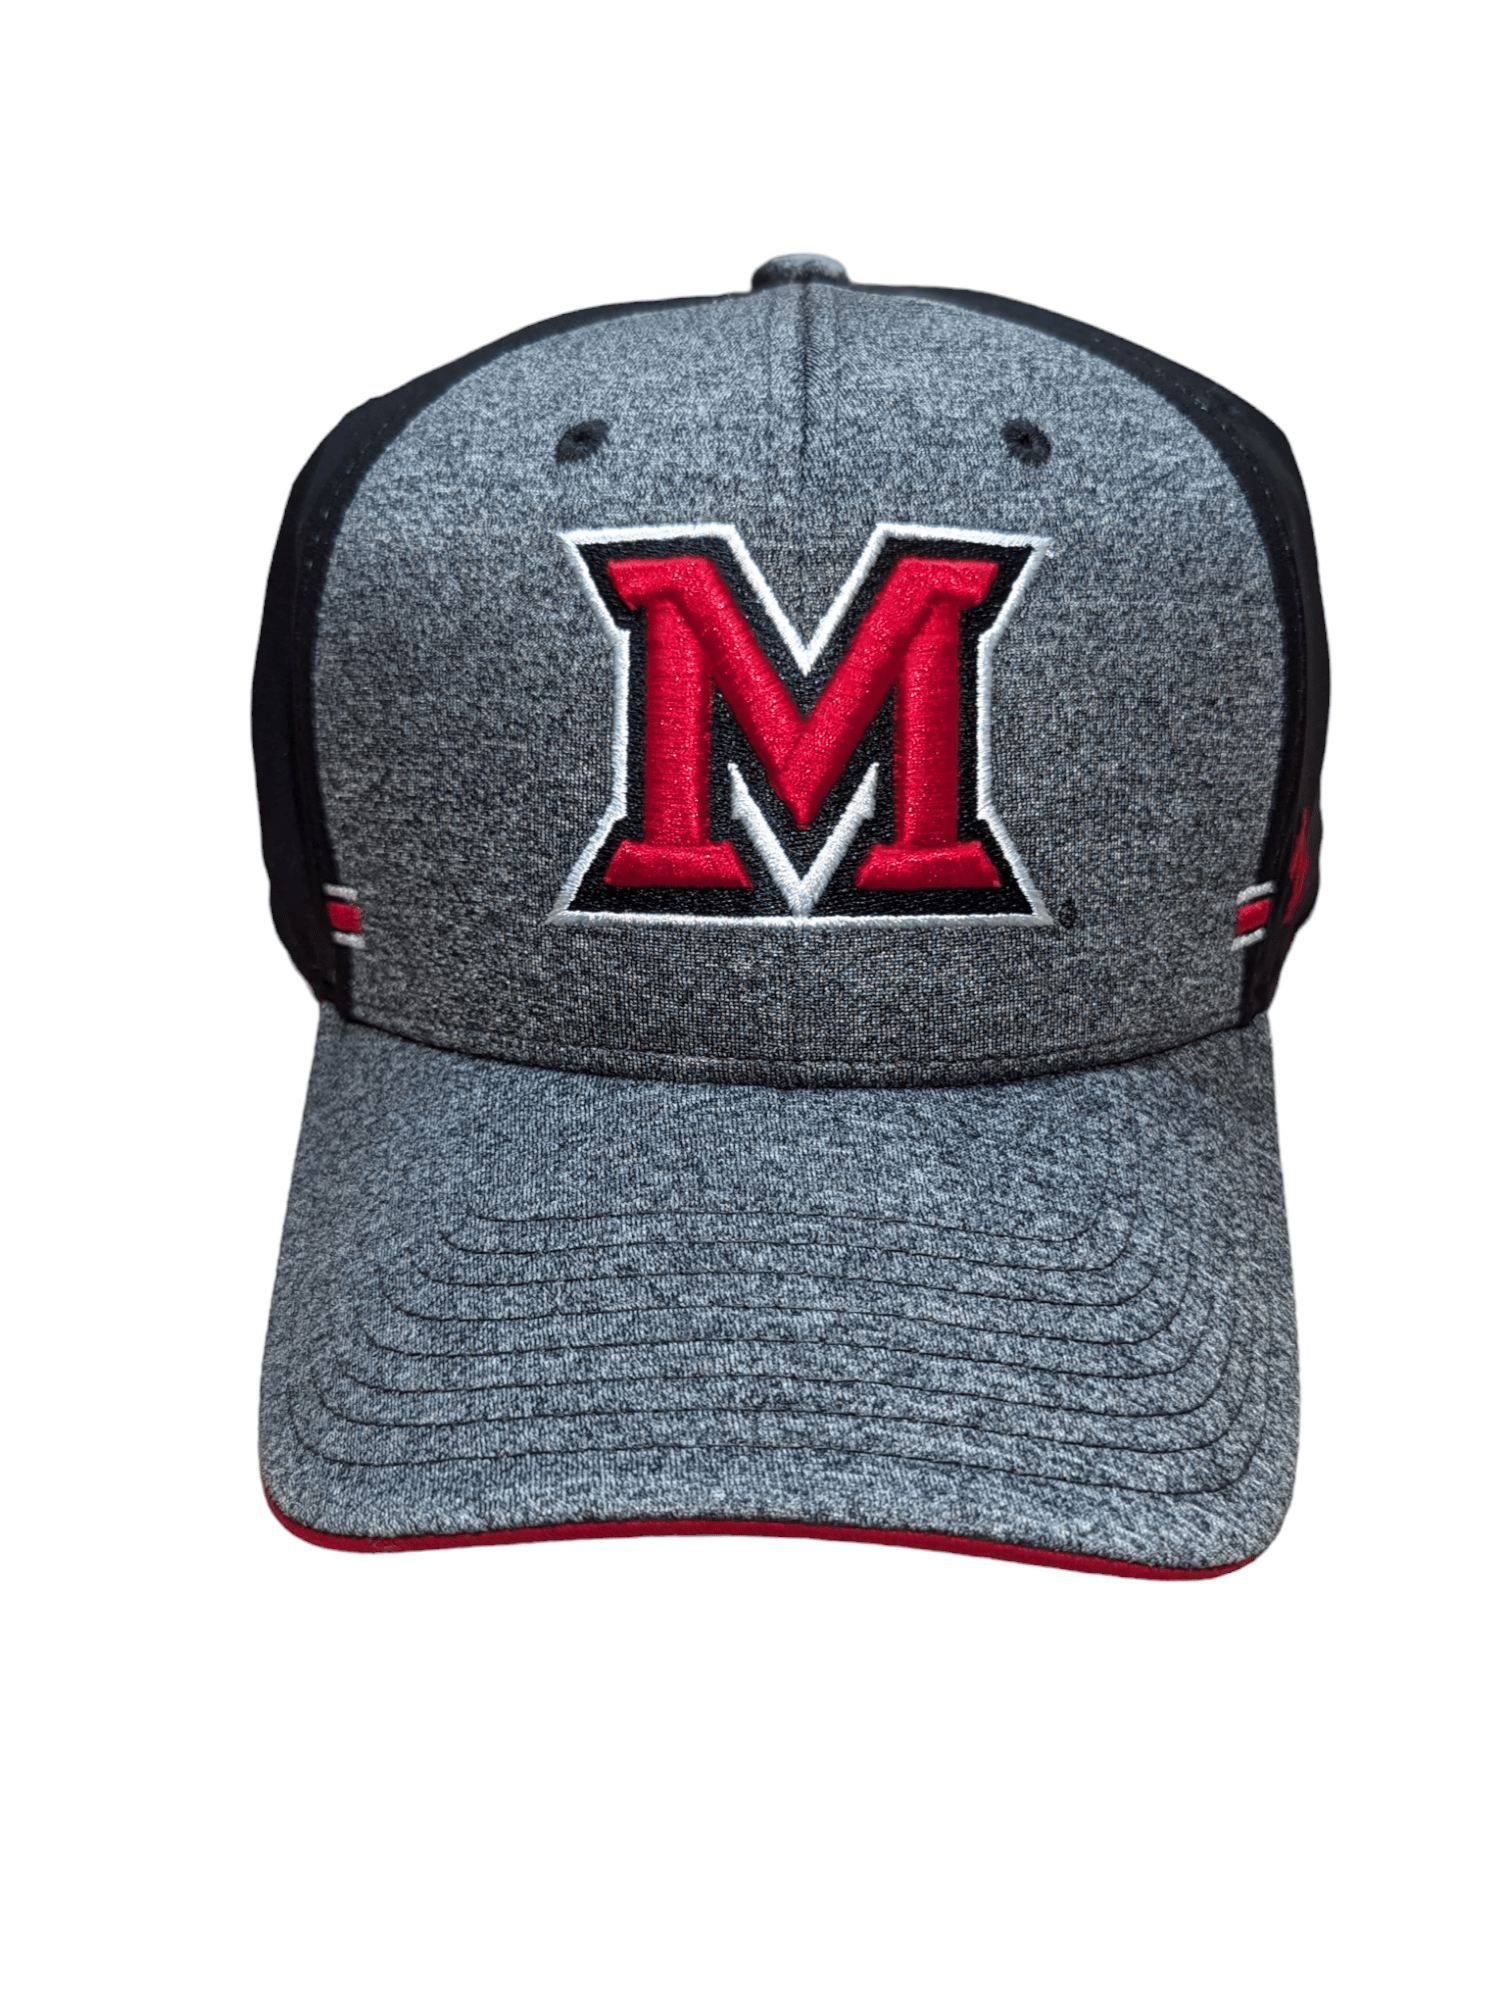 Zephyr Hat Miami Redhawks 1st and Goal Black and Grey Hat